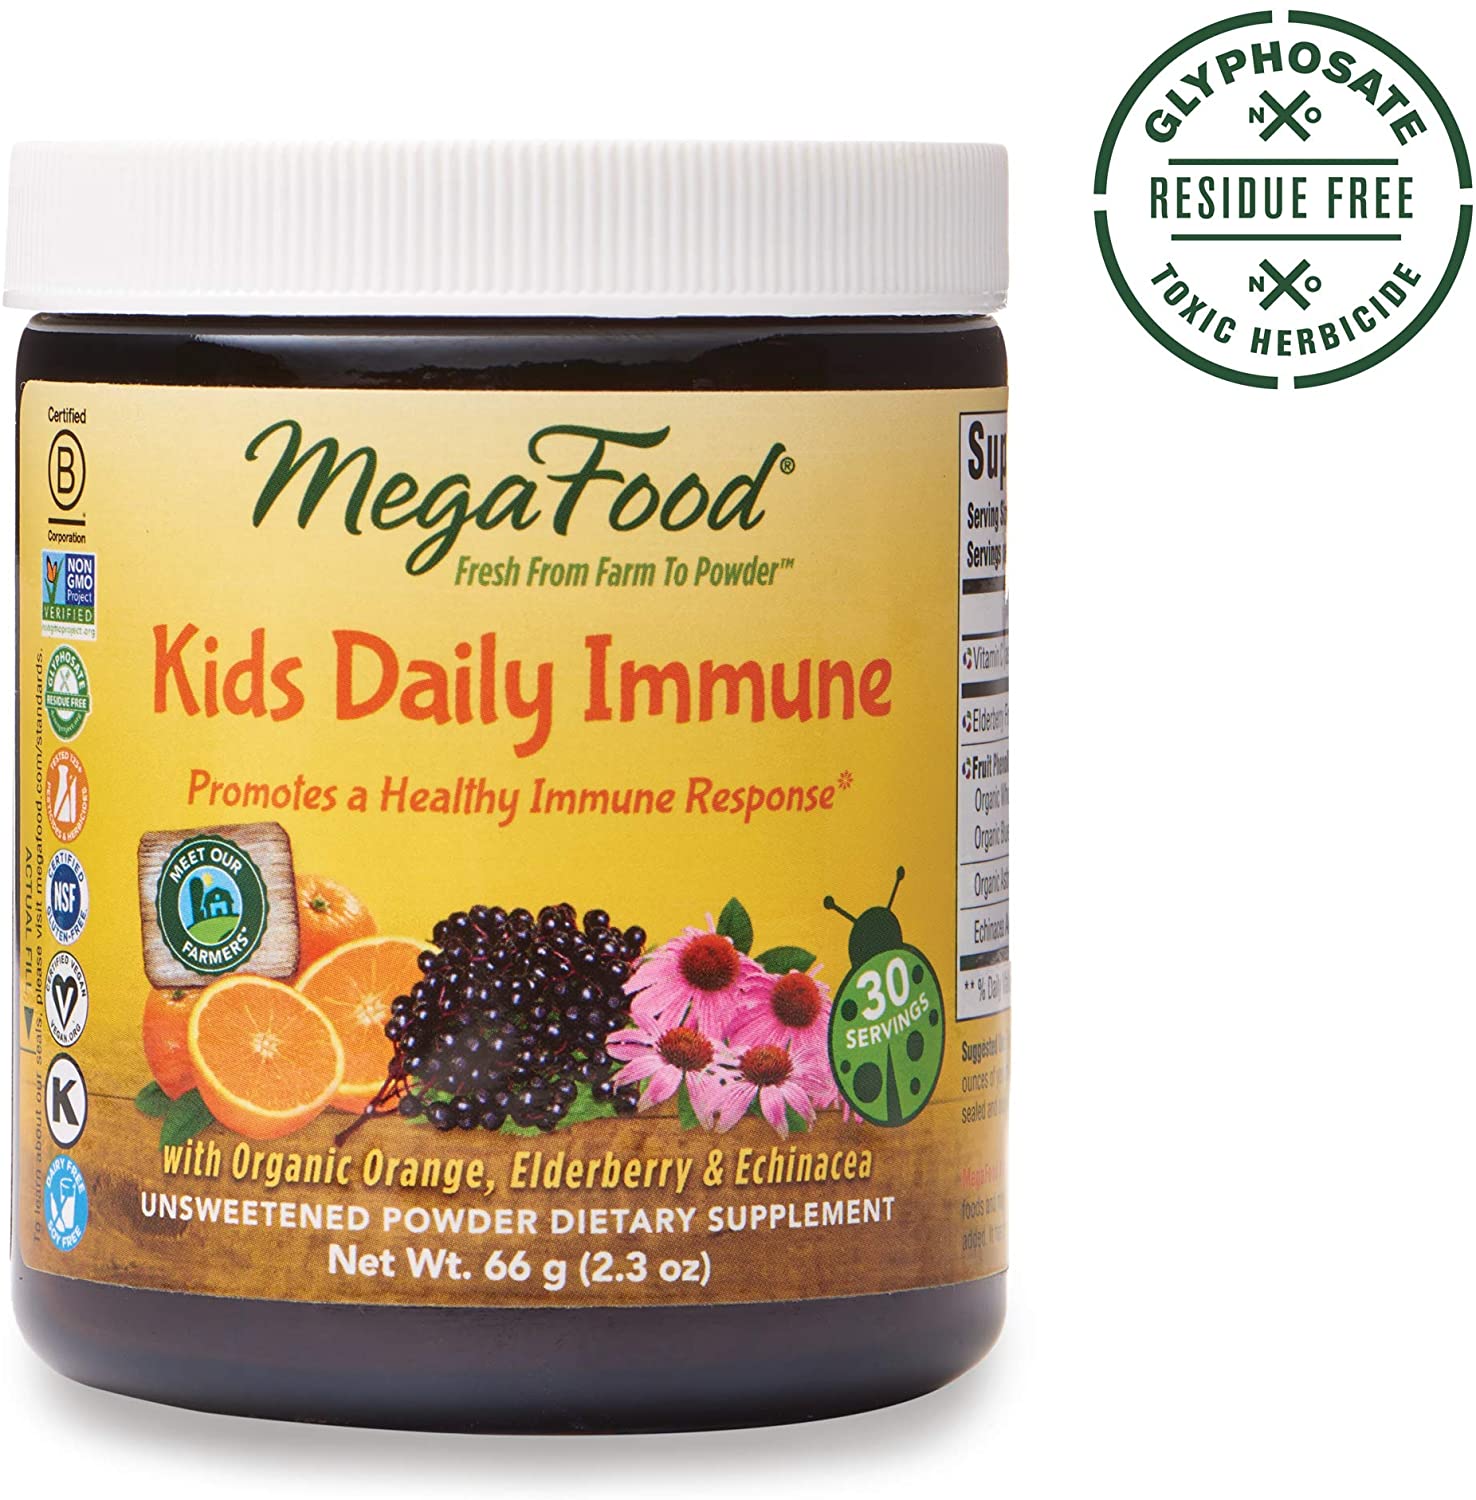 MegaFood, Kids Daily Immune Booster Powder, Promotes a Healthy Immune Response, Drink Mix Supplement, Gluten Free, Vegan,